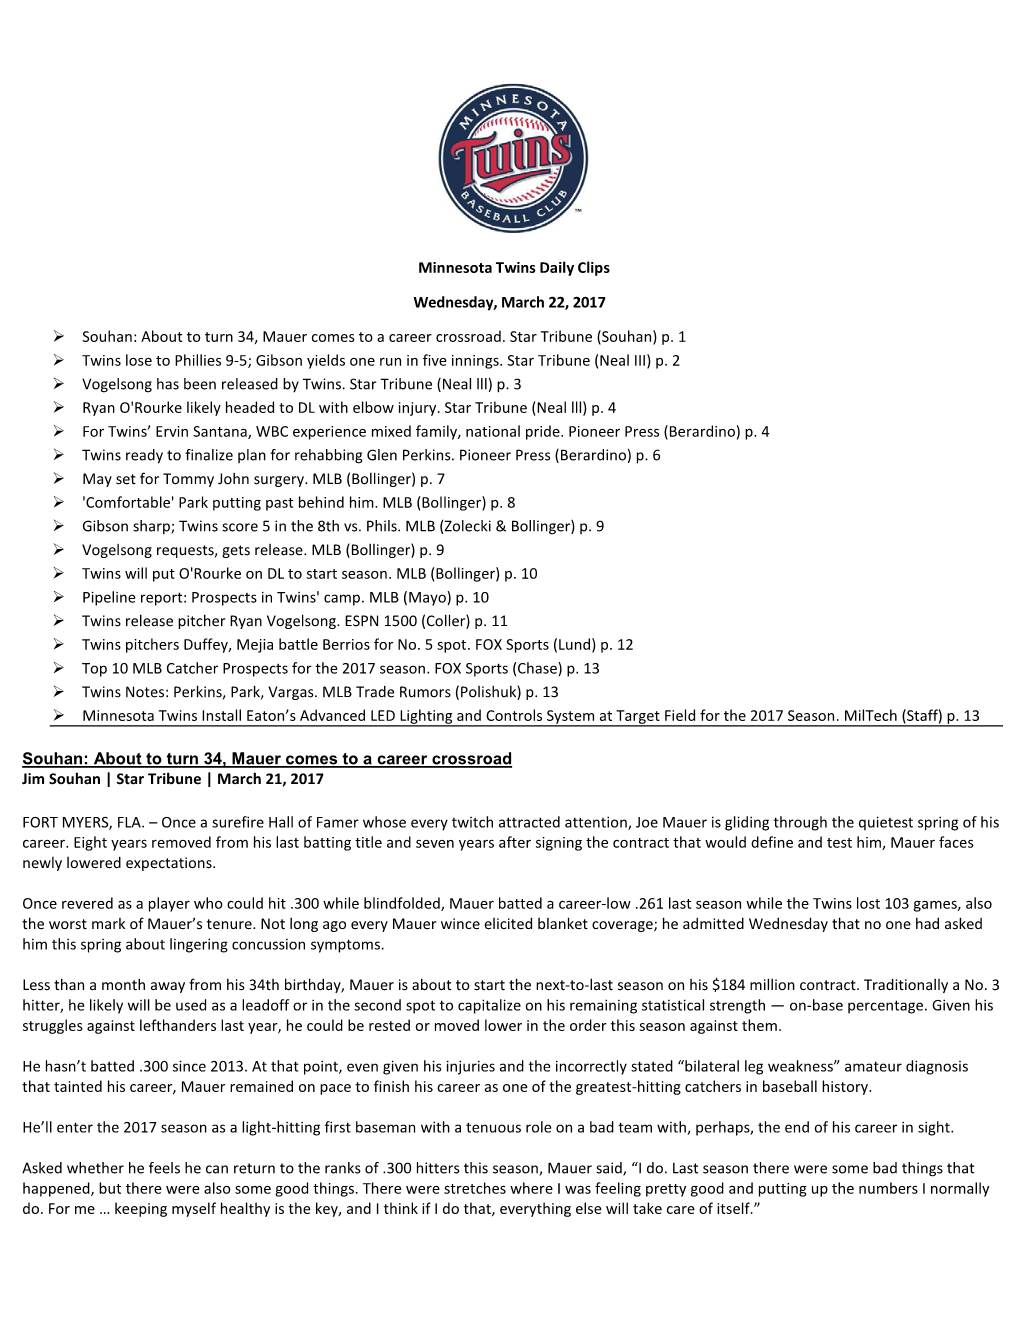 Minnesota Twins Daily Clips Wednesday, March 22